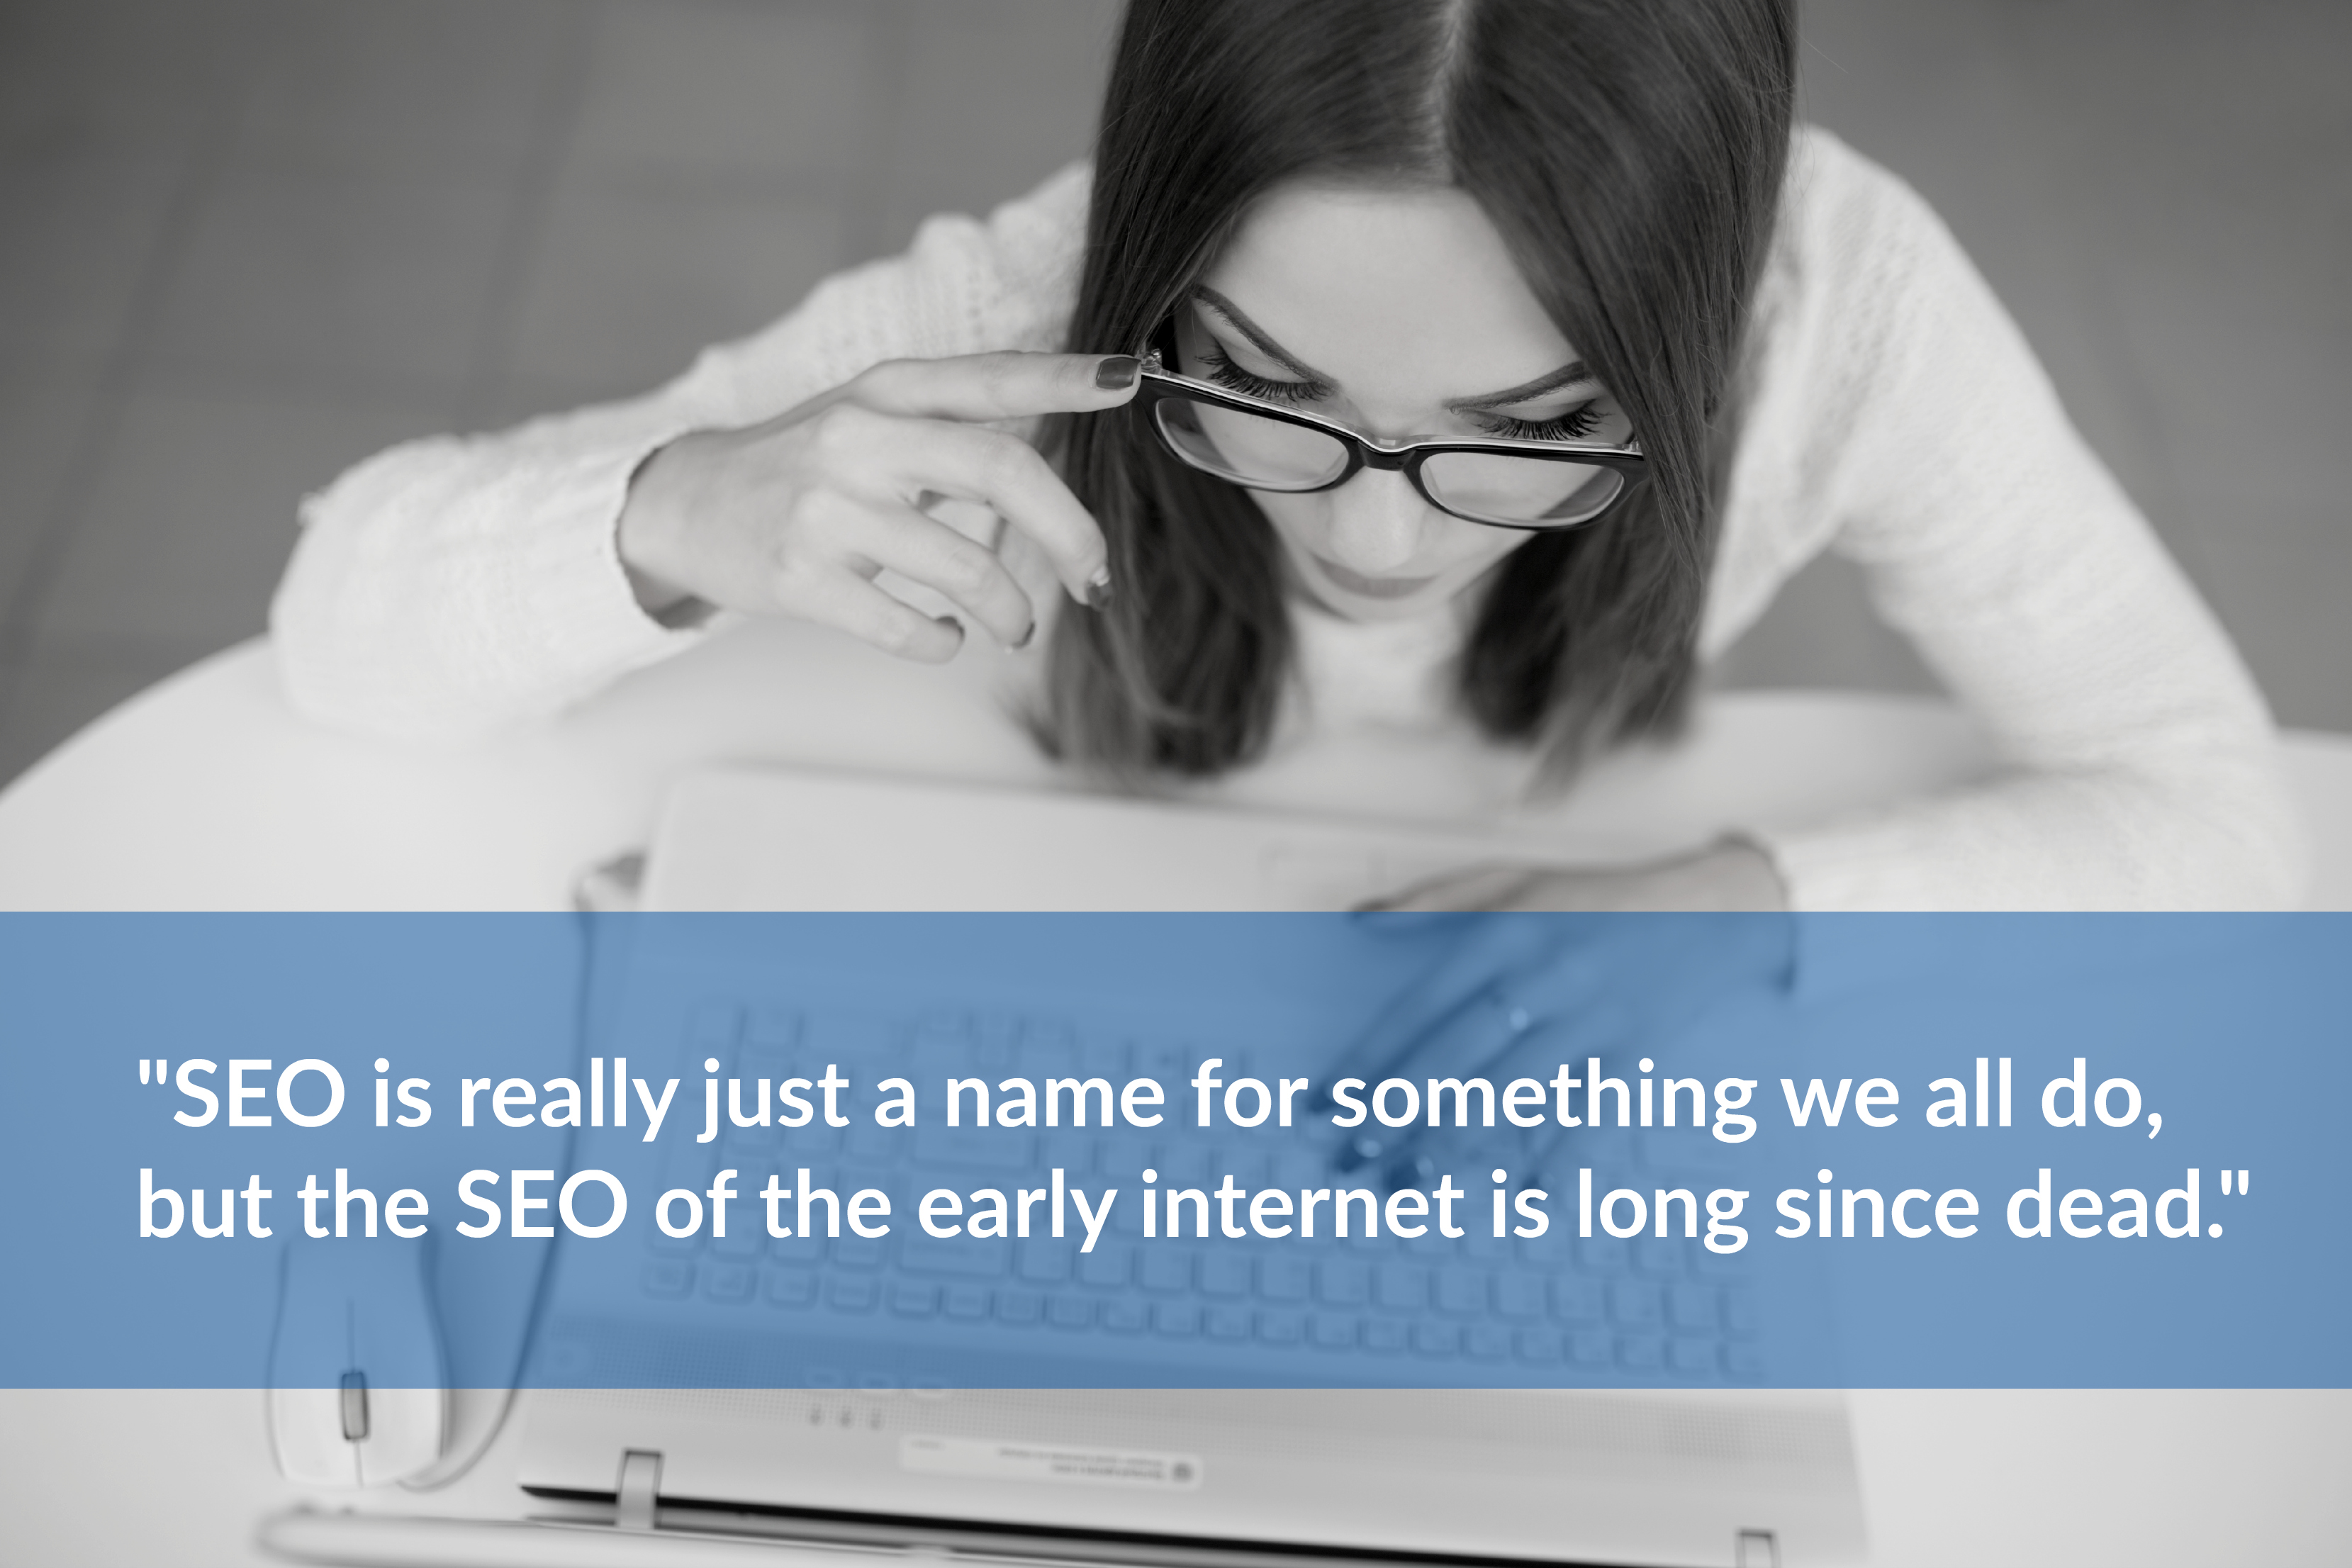 SEO is really just a name for something we all do, but the SEO of the early internet is long since dead 